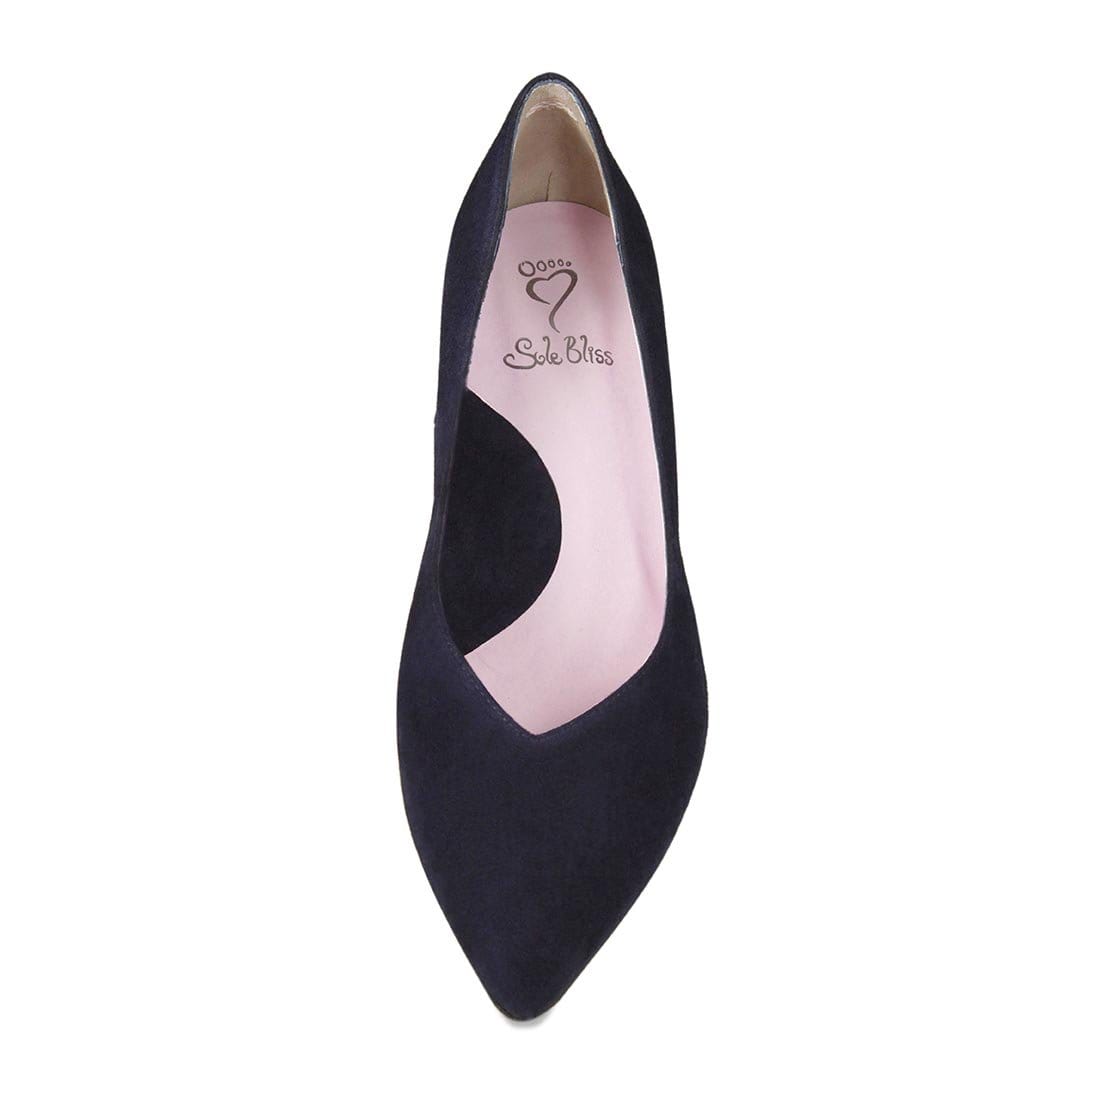 Most Comfortable Dress Shoes for Women USA - Calla